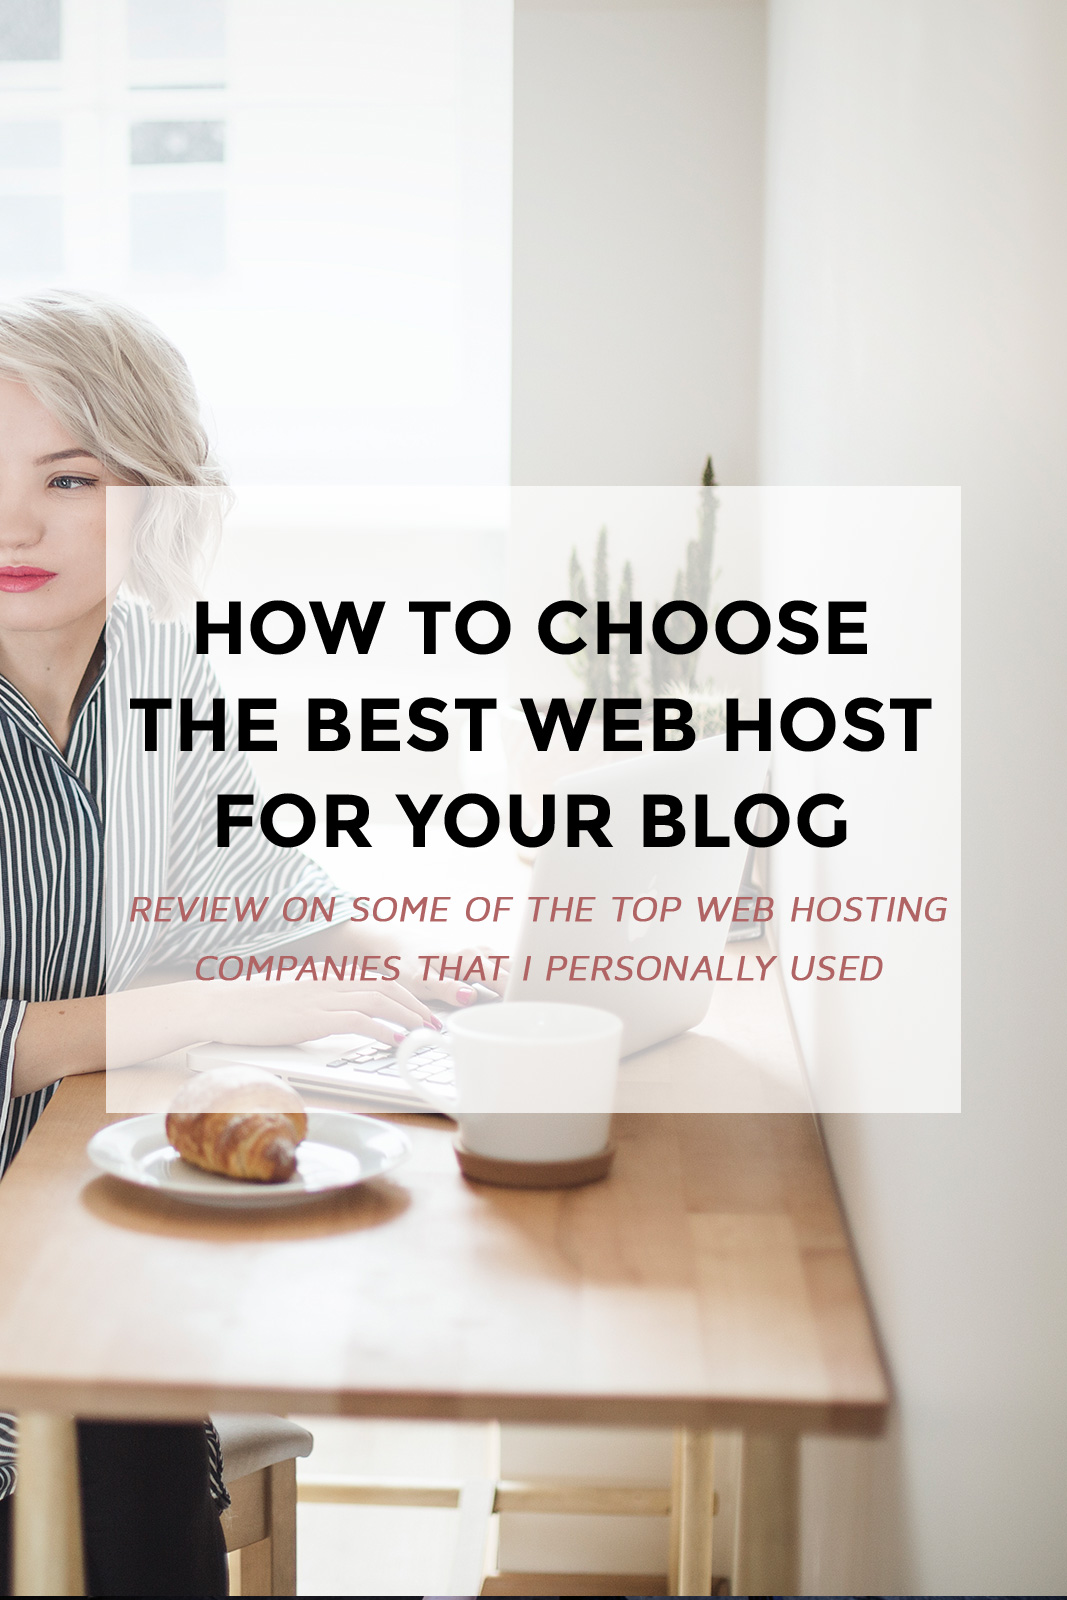 I’ve been using different hosting services for over 4 years now as a blogger and blog designer. In this post, I’m going to review a few of the web hosting companies I personally tested & give you some pros & cons, so you can decide what fits your needs best. (blogging tips, business tips, web host for bloggers, best web host, web hosting, siteground for bloggers, blogging for money)